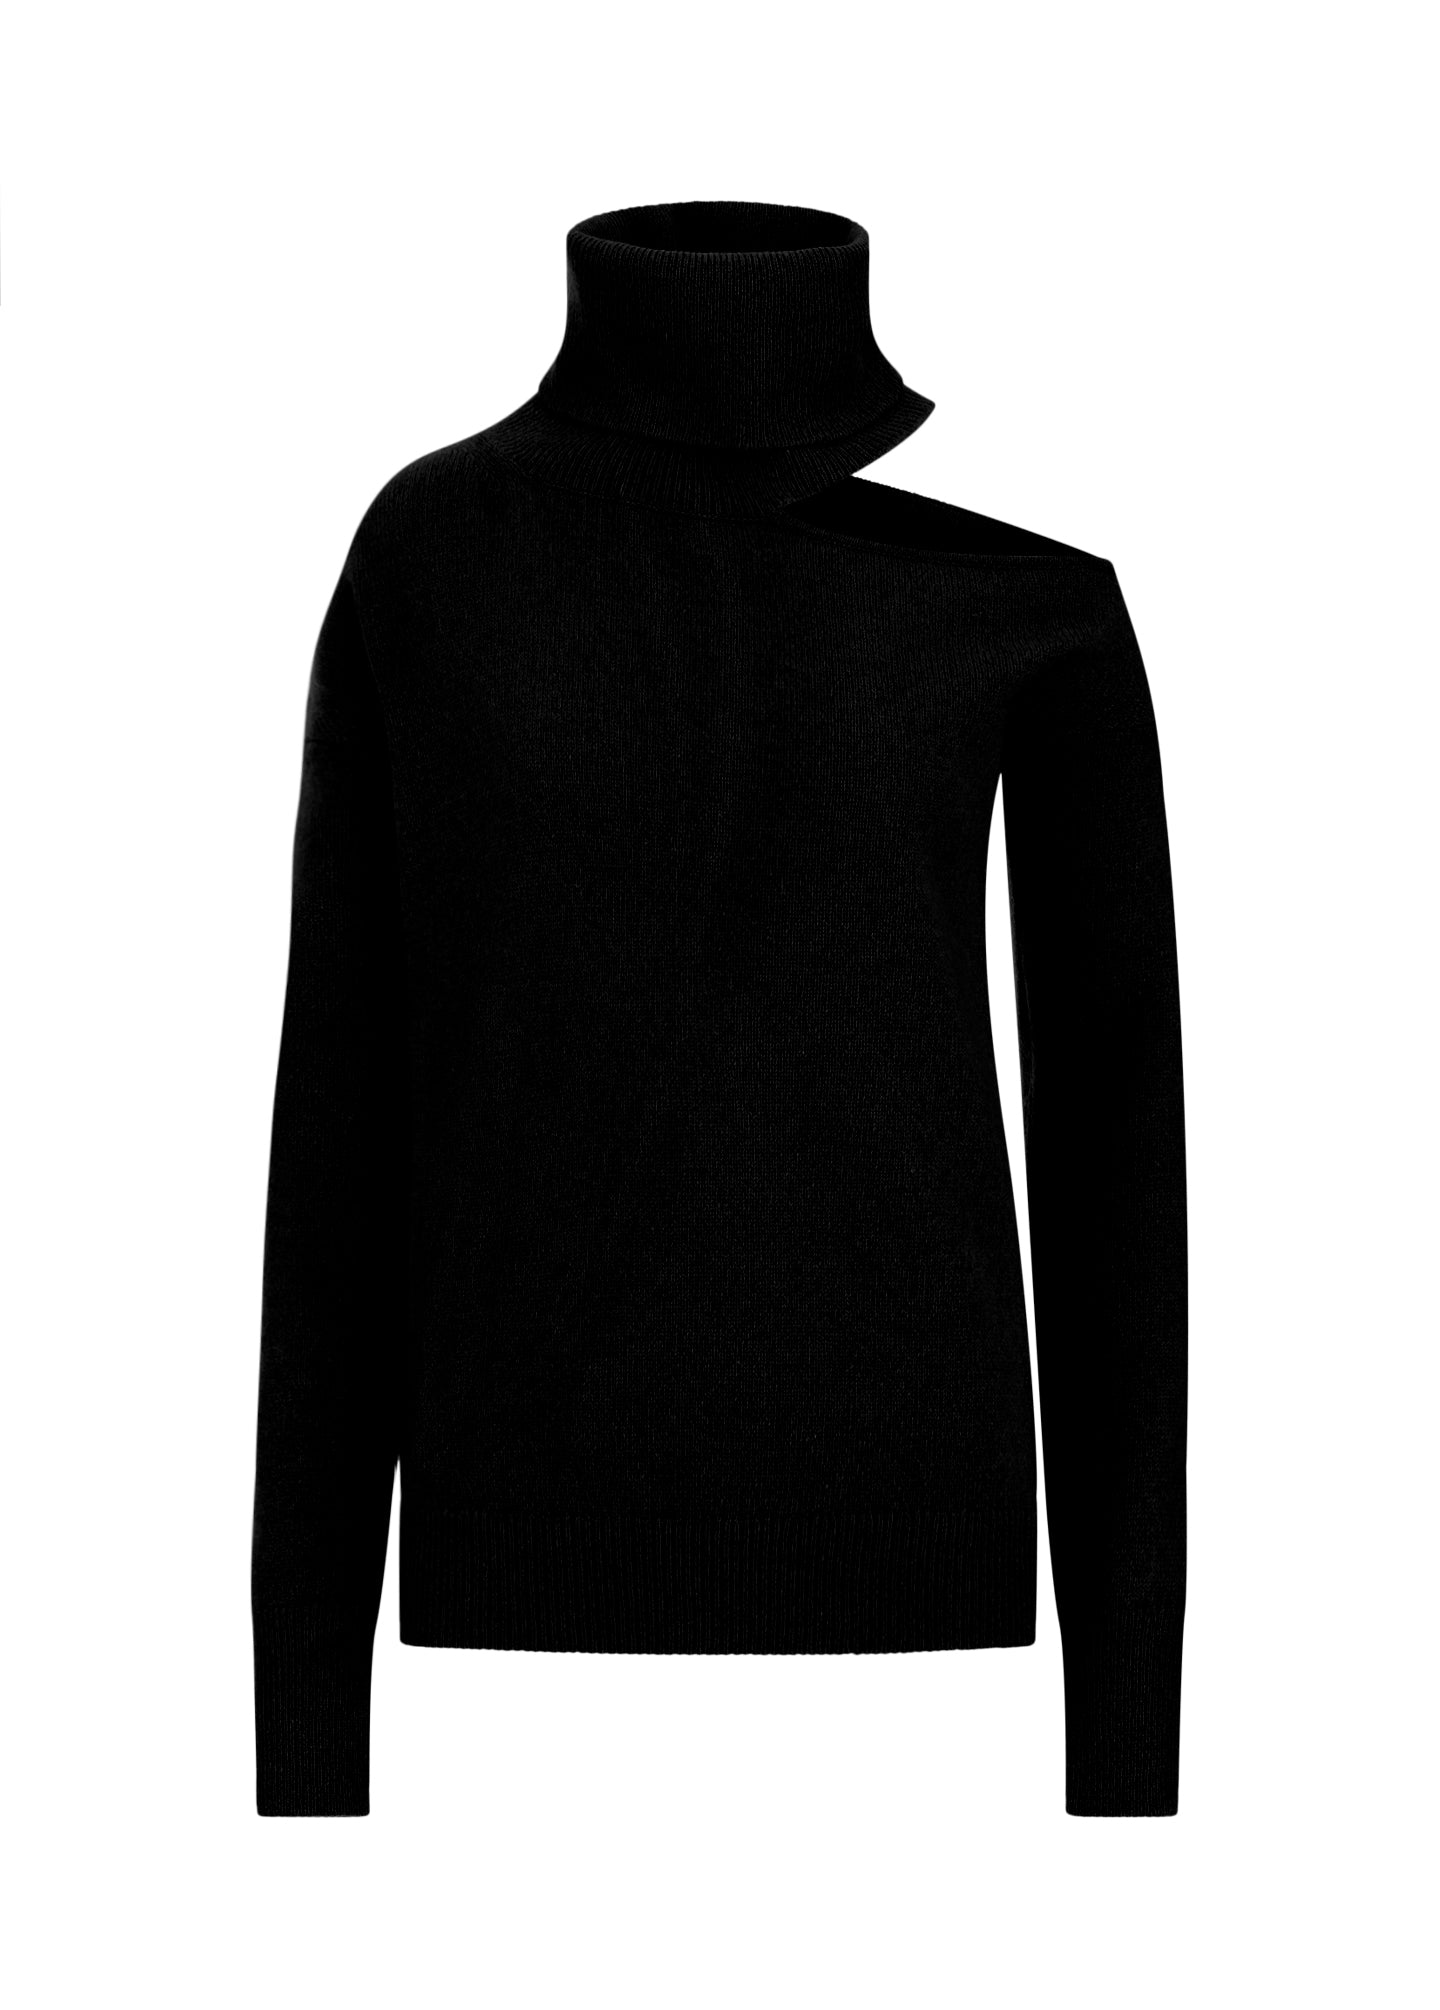 Black cashmere polo neck ladies cut out sweater